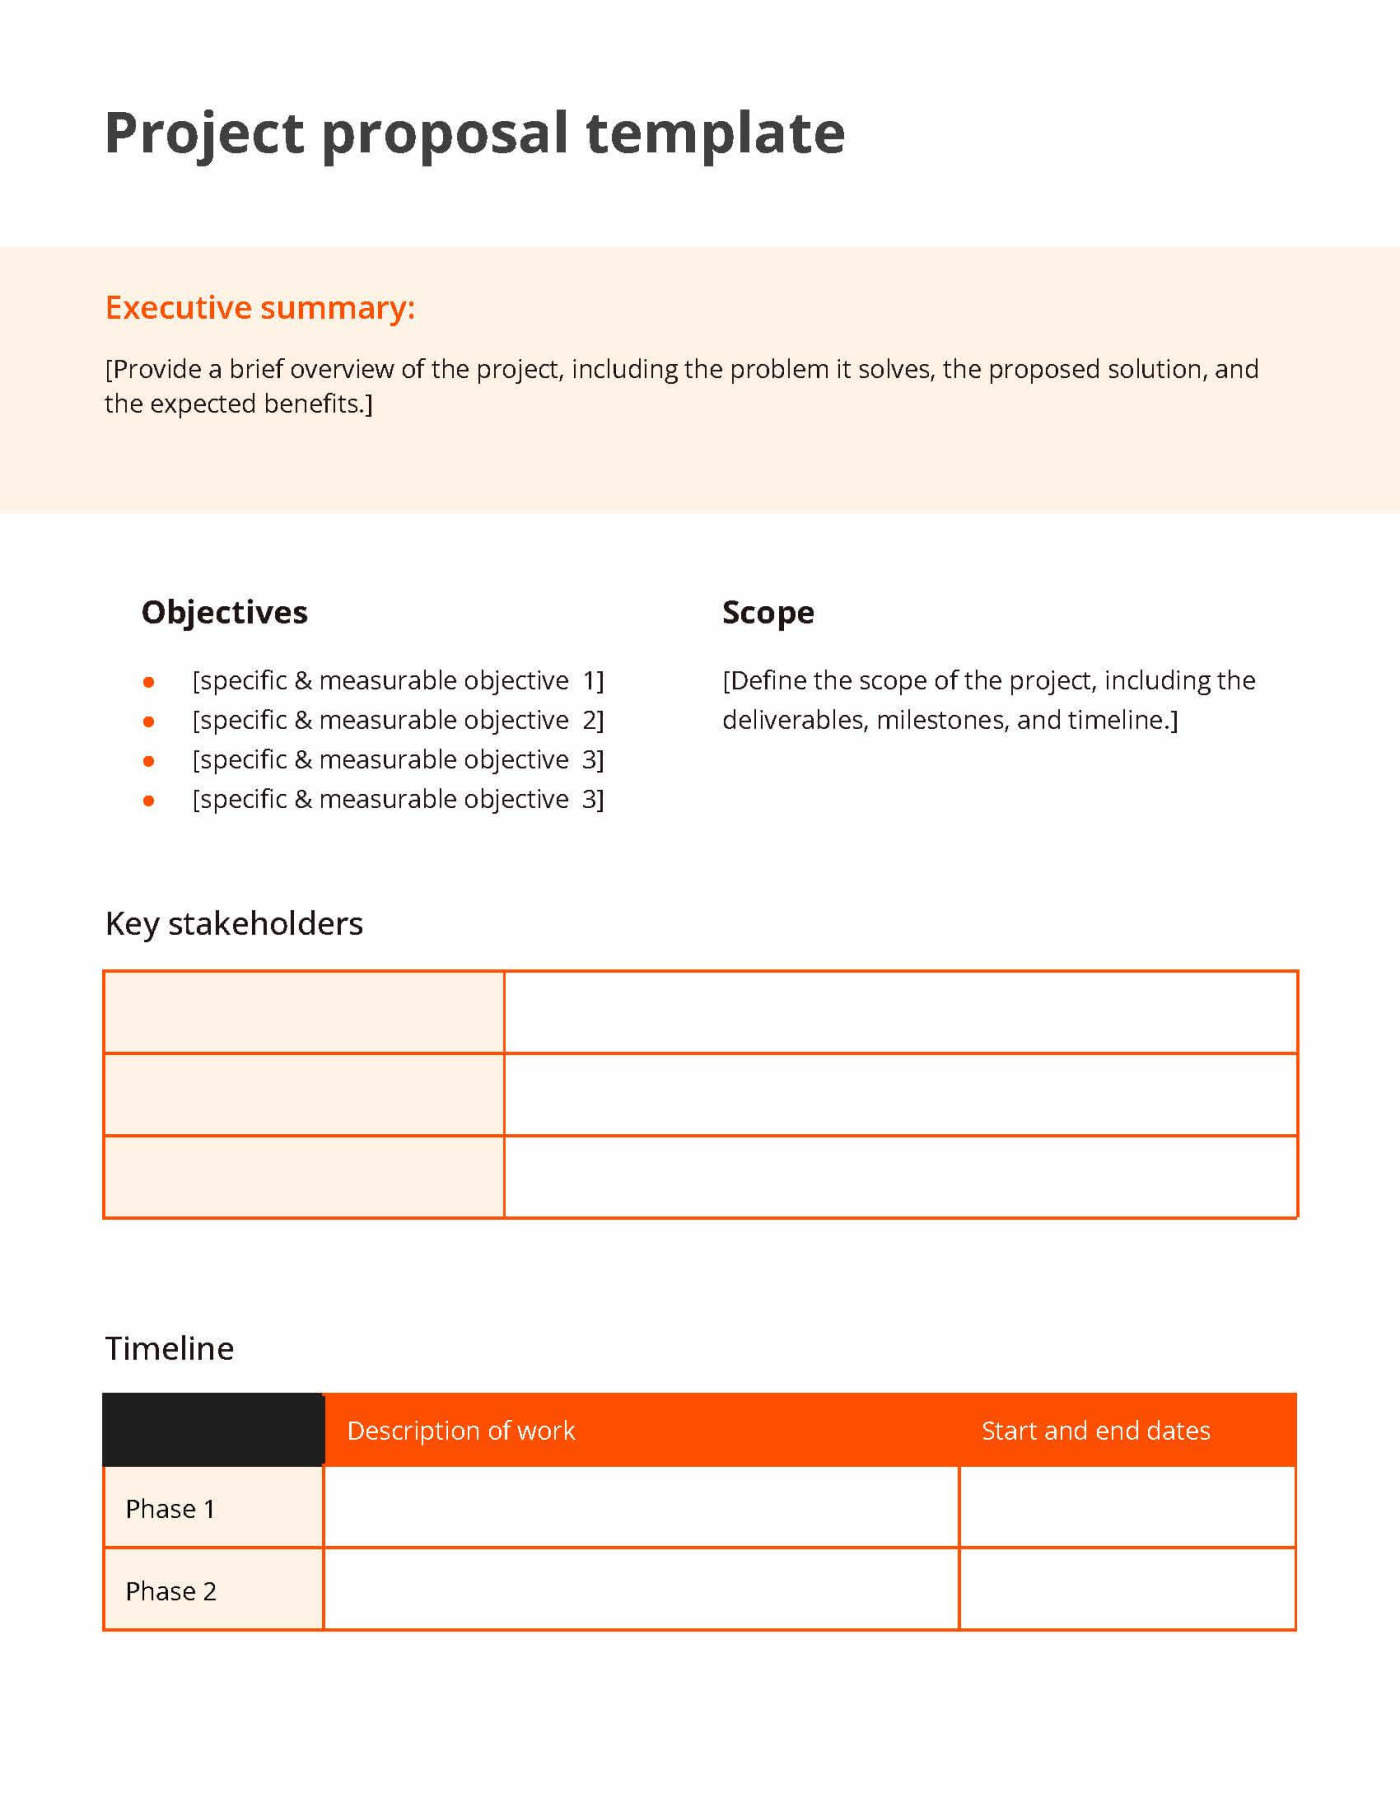 Orange and white project proposal template that outlines the details of a specific project, including an executive summary, objectives, scope, timeline, and costs, submitted for approval or funding